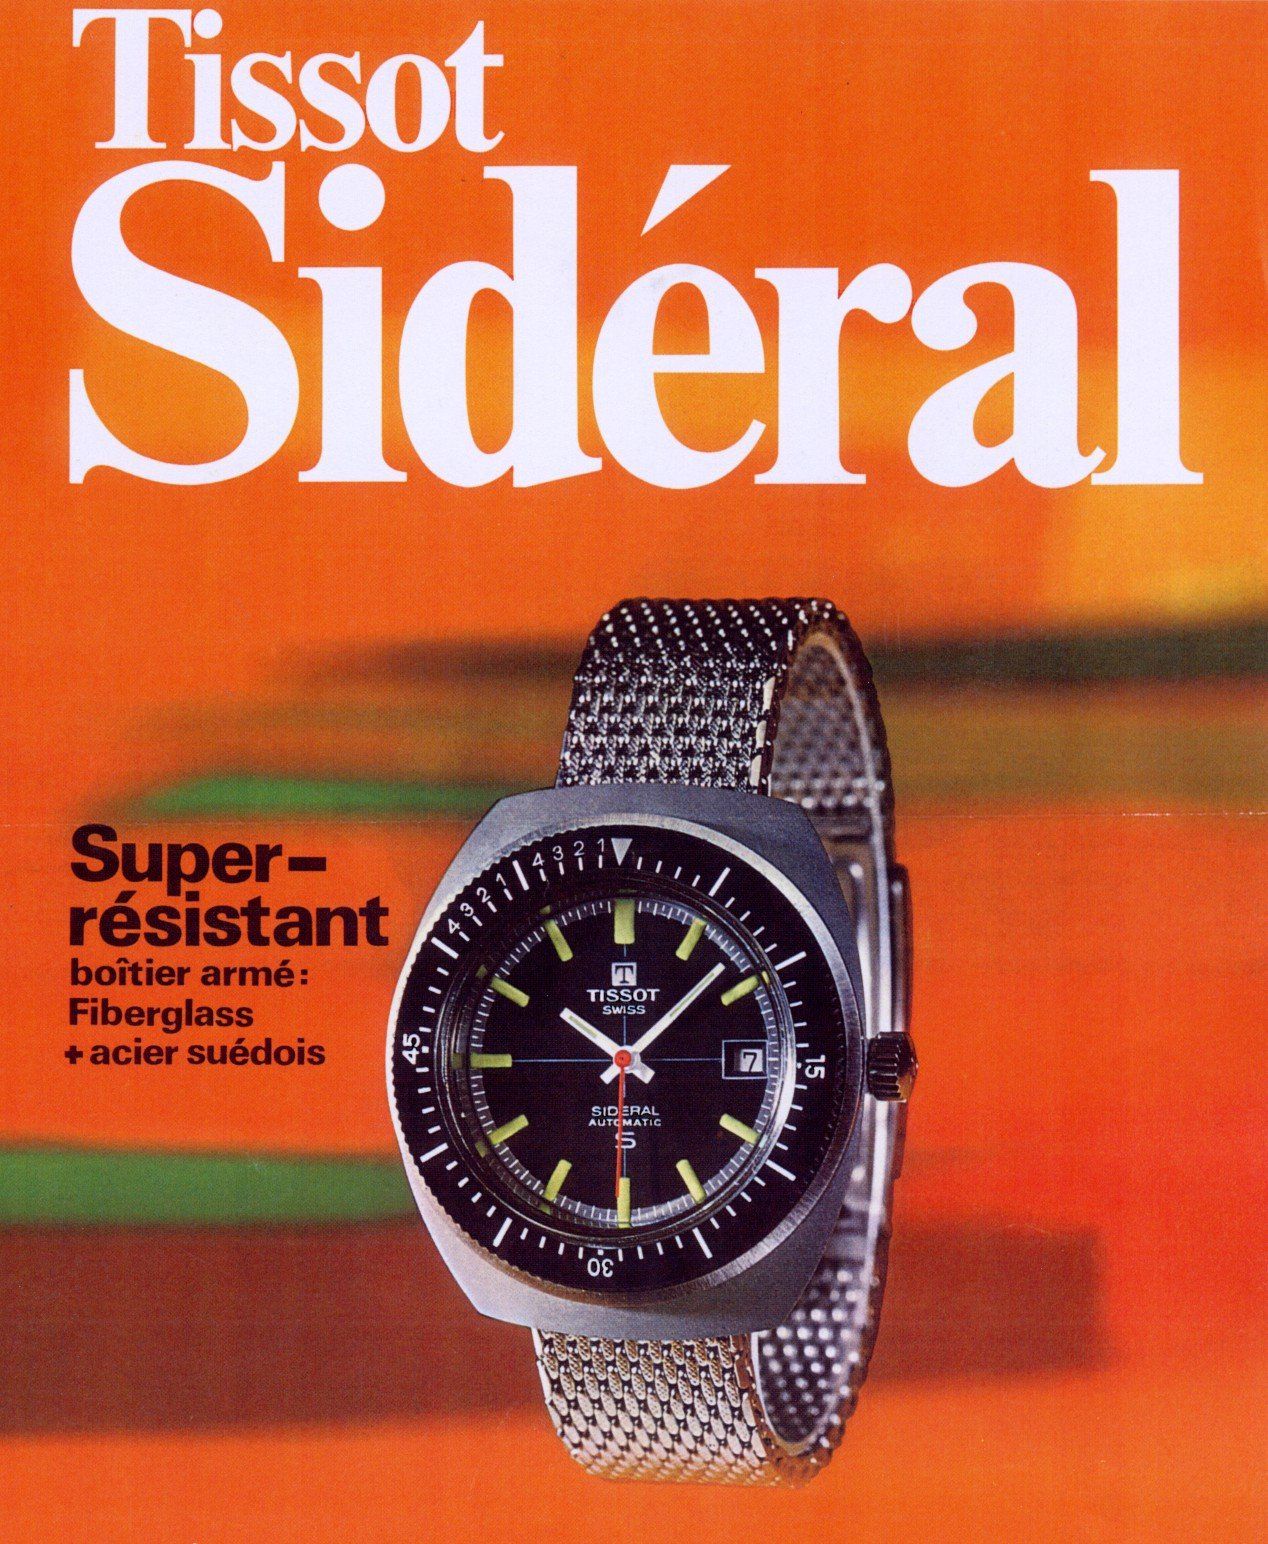 Tissot Sideral, 1969 Campaign Ad